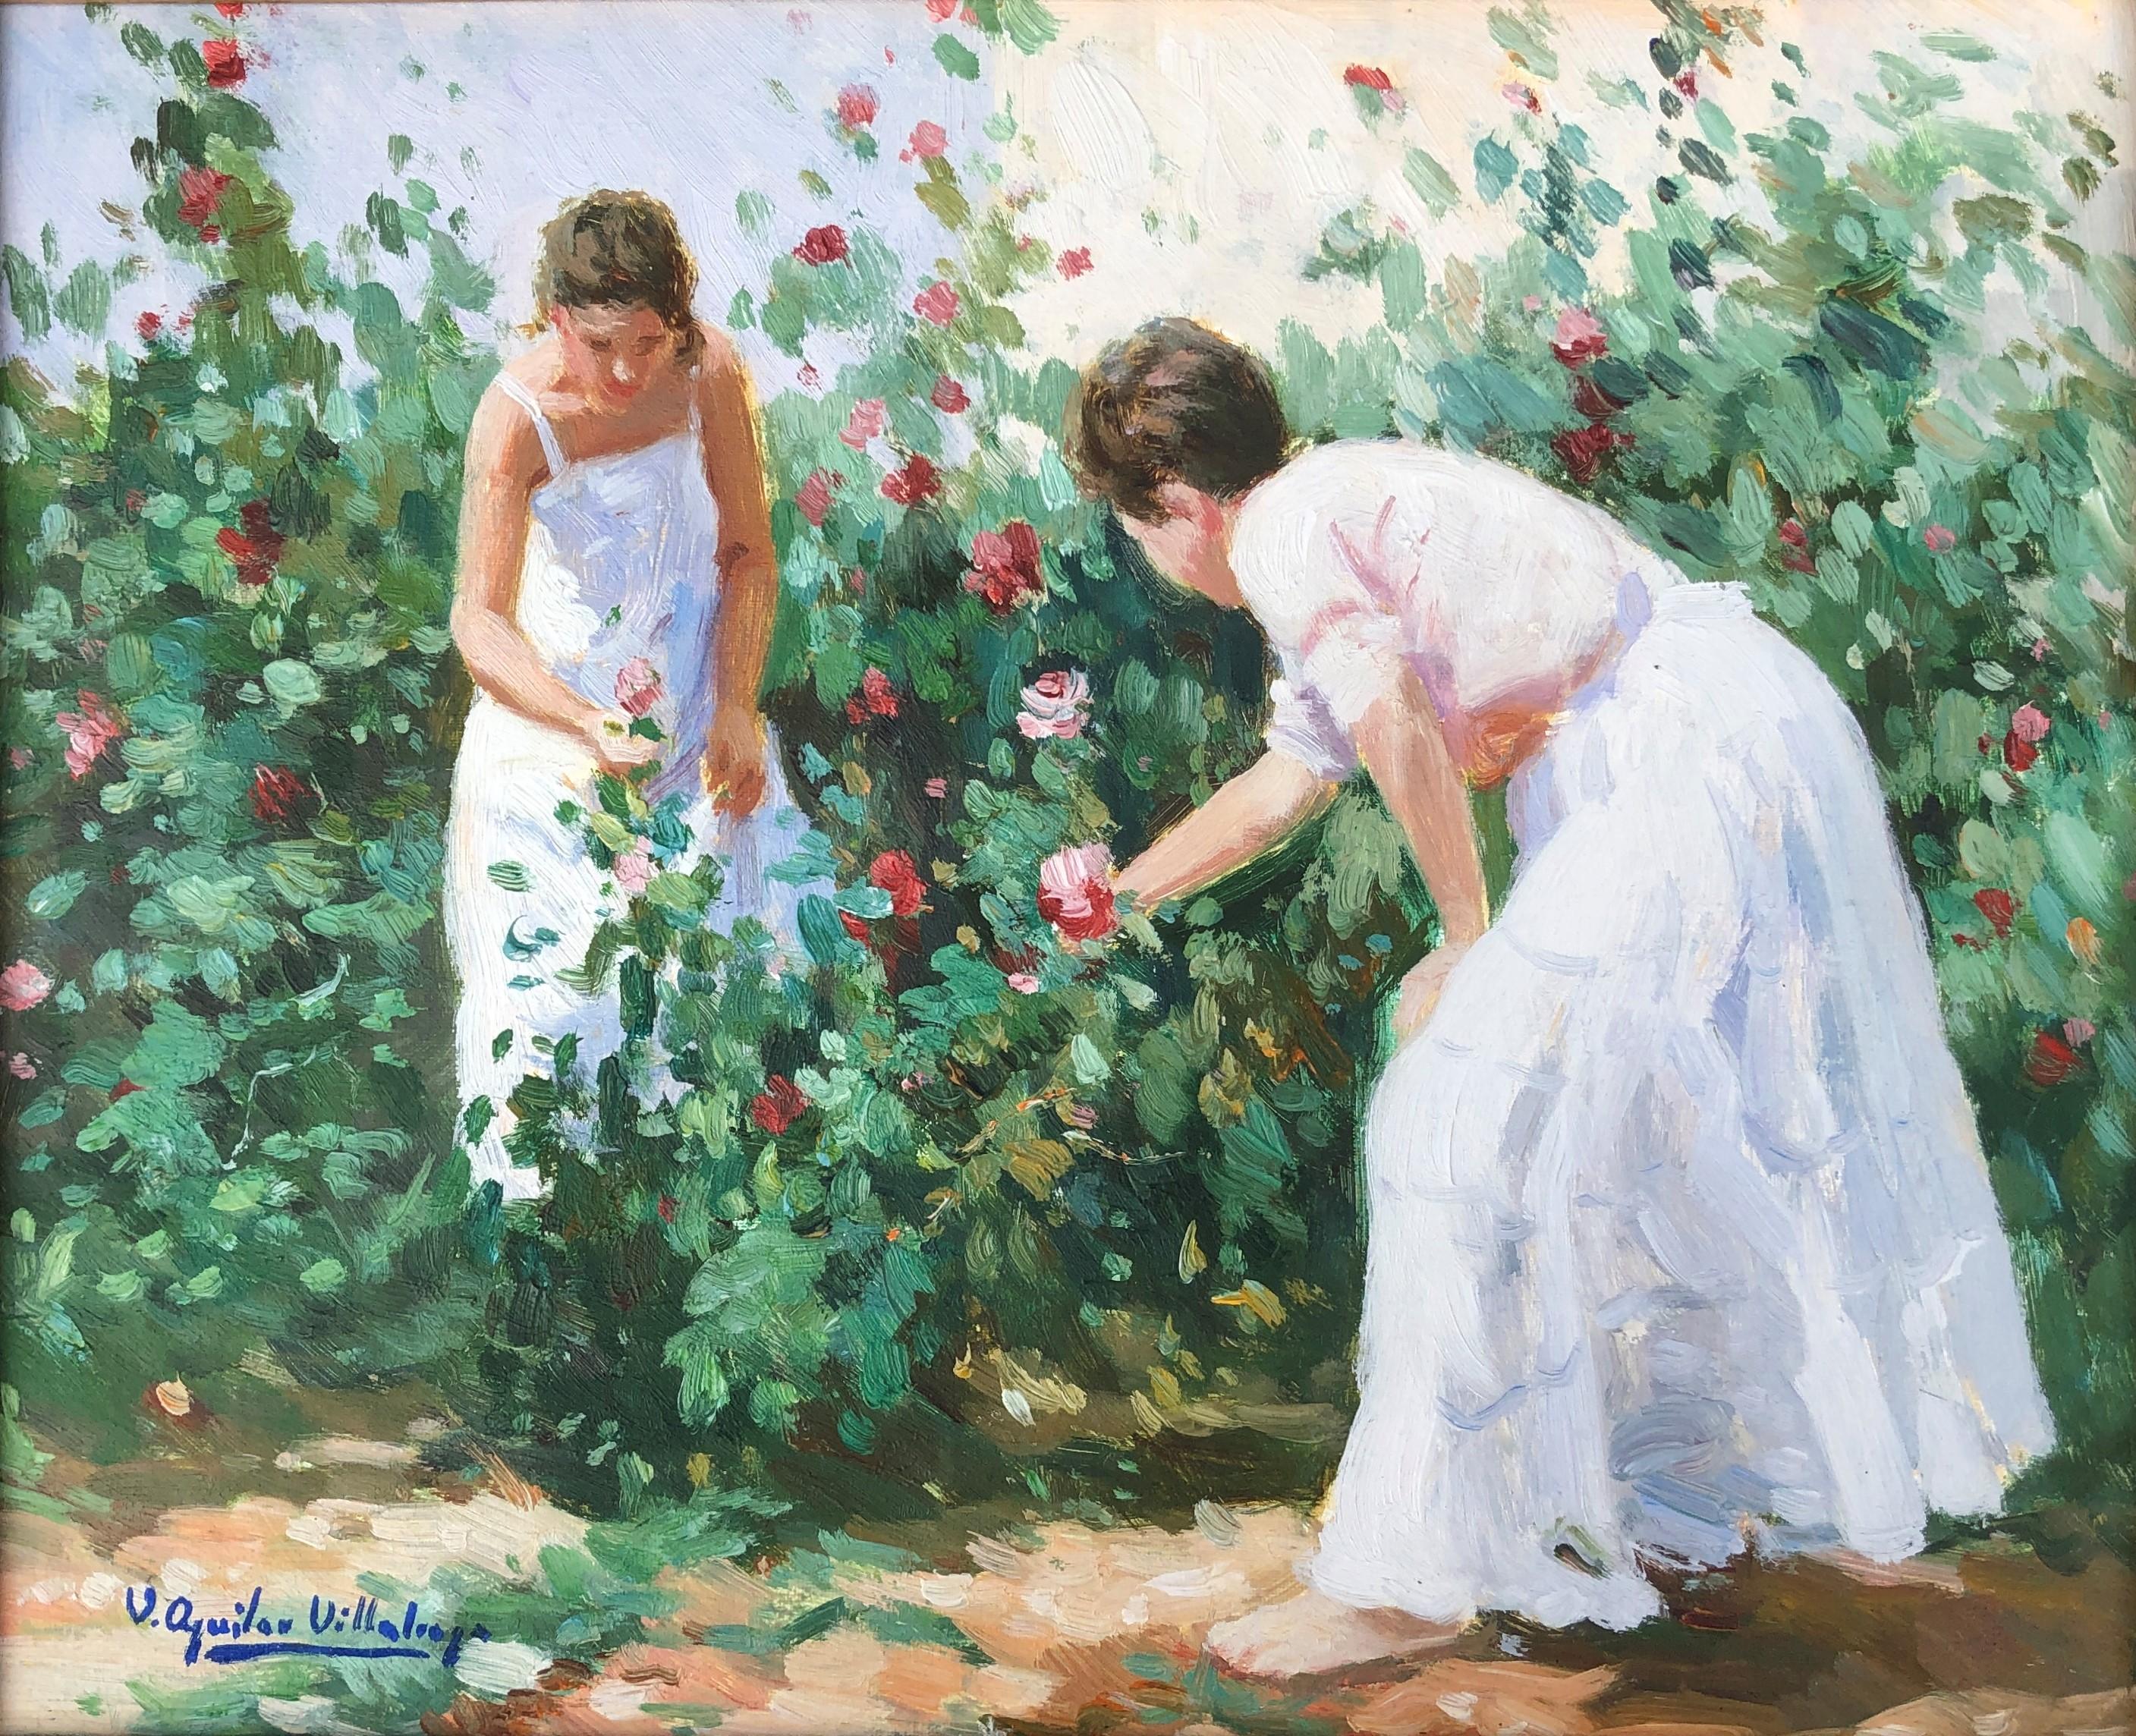 Vicente Aguilar Villalonga Interior Painting - Garden with figures Mallorca oil on canvas painting